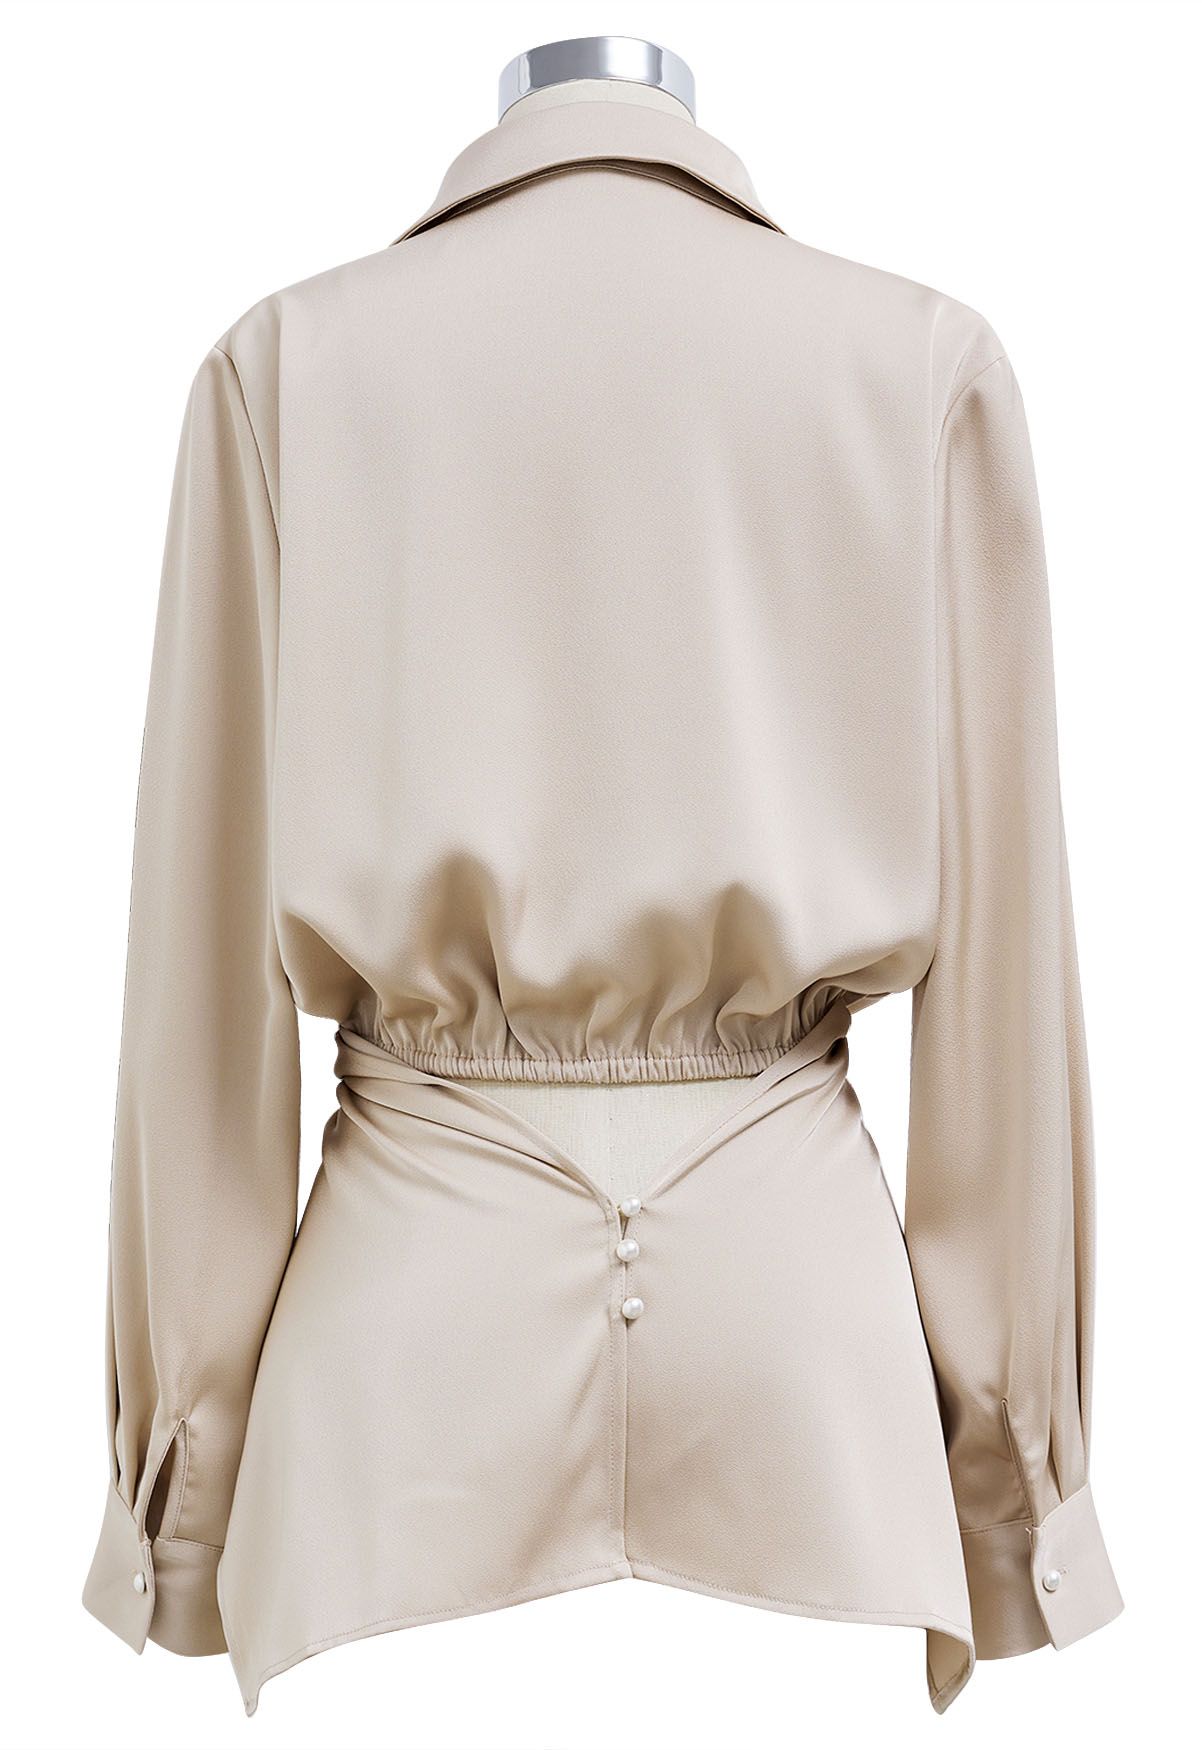 Crisscross Waist V-Neck Shirt in Champagne - Retro, Indie and Unique ...